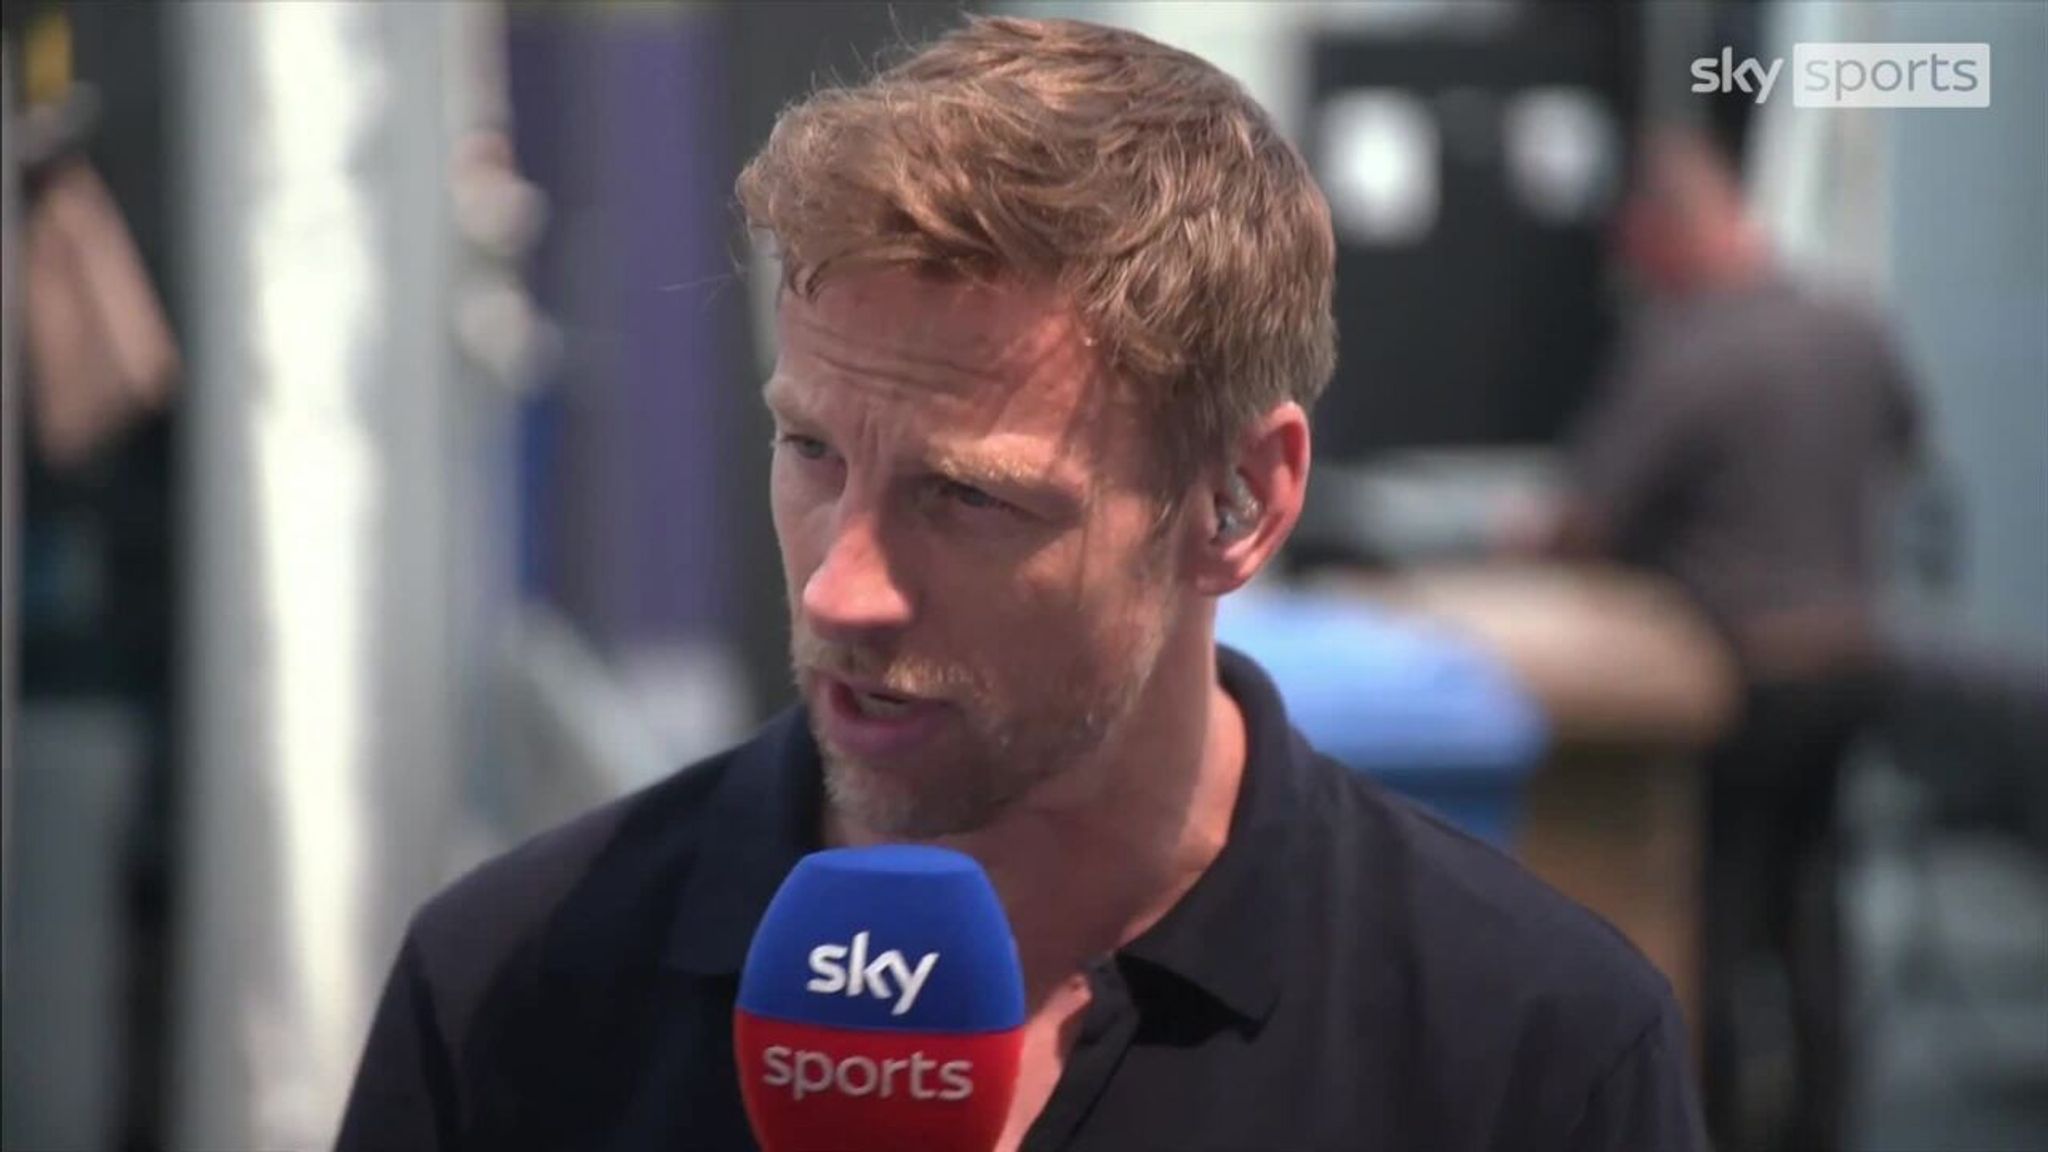 Jenson Button Shortened first practice disappointing for everyone Video Watch TV Show Sky Sports